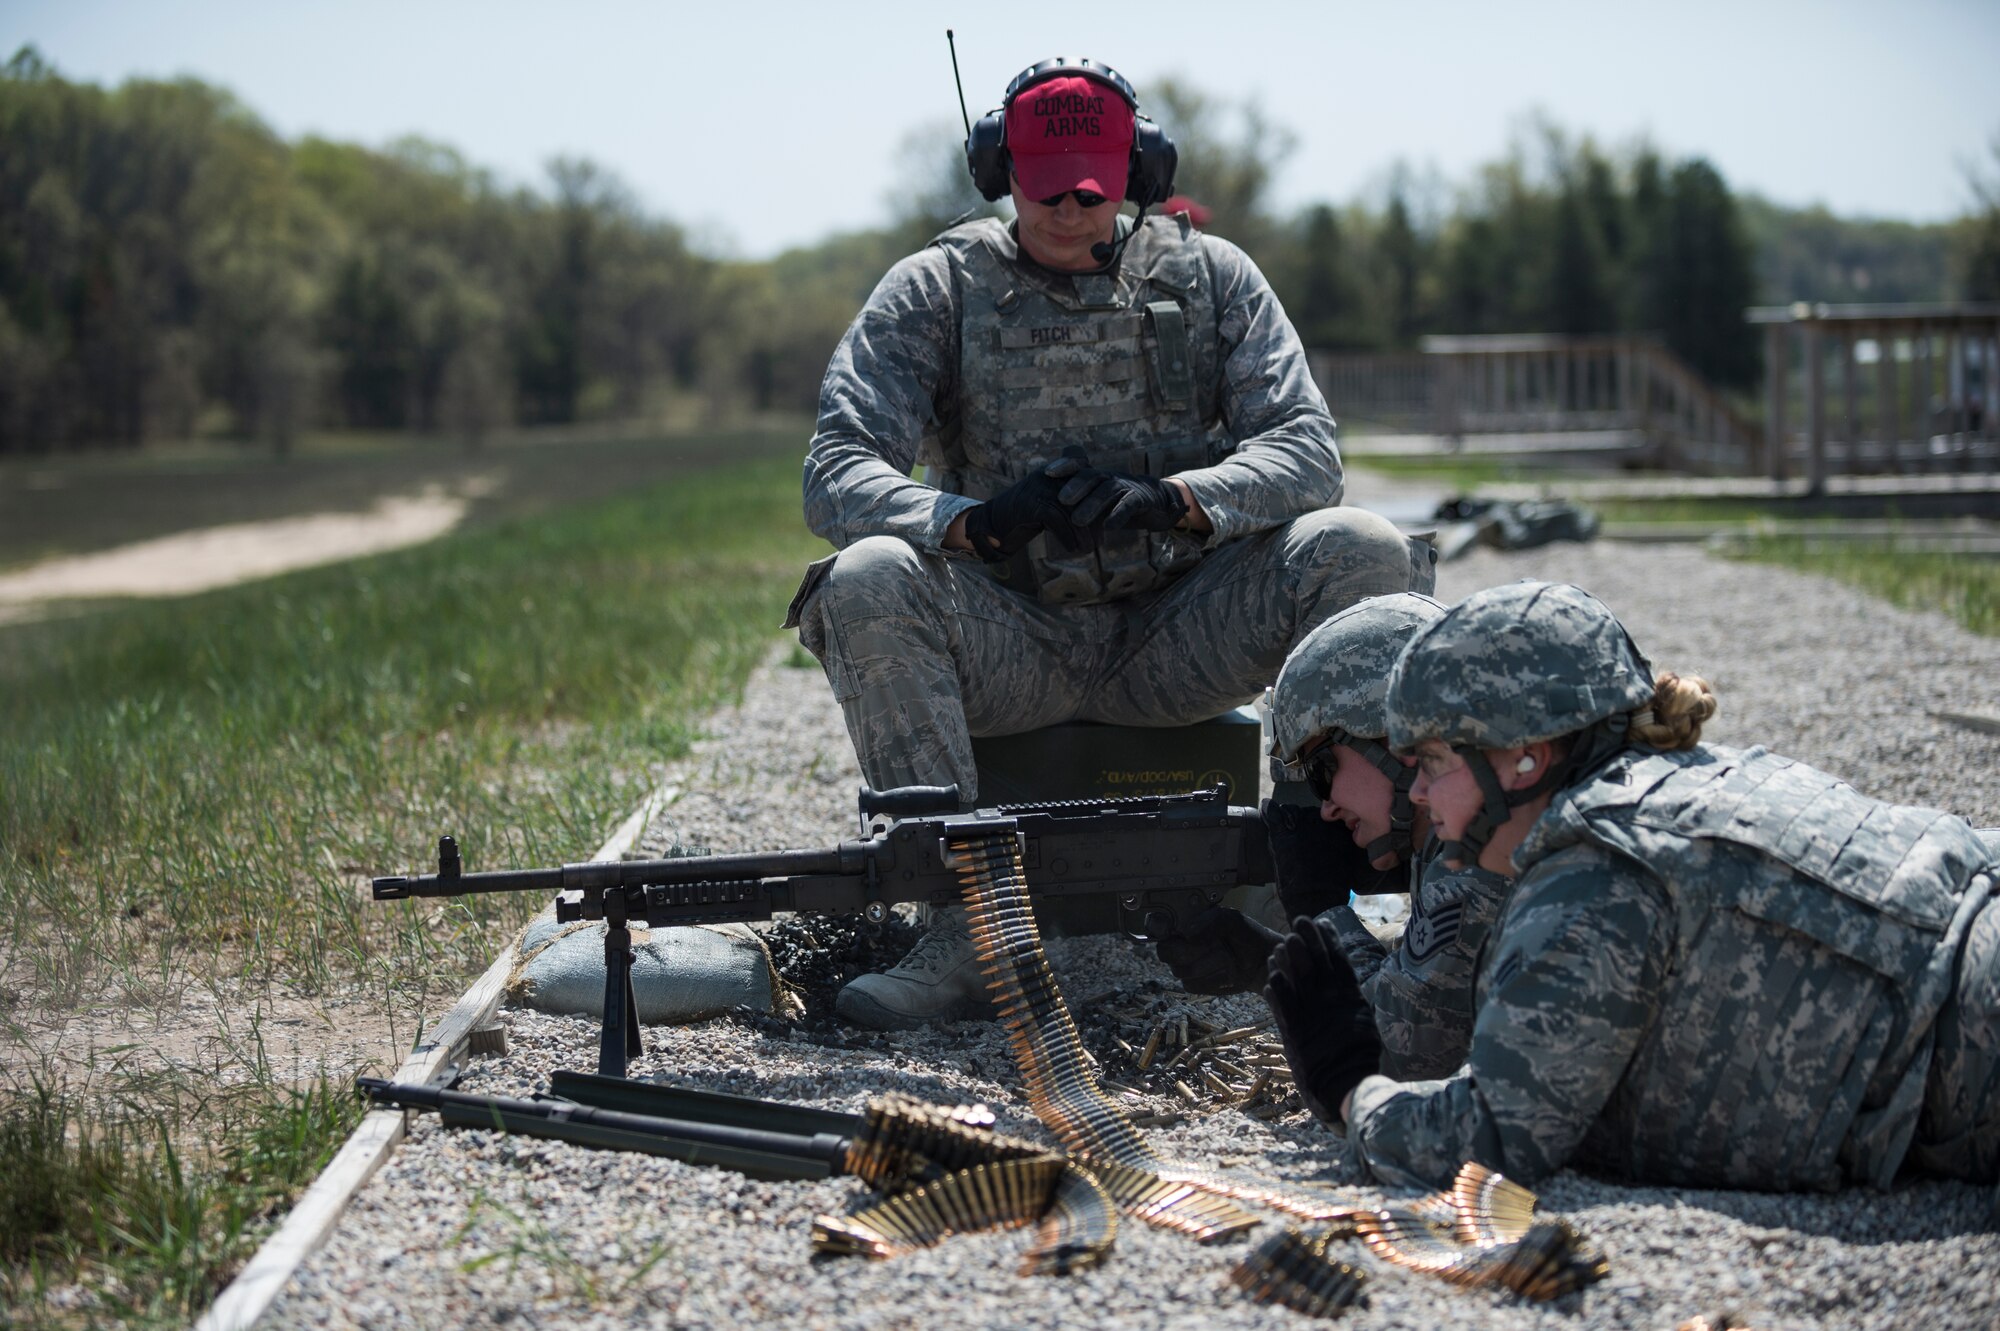 An Airman assigned to the 107th Security Forces Squadron, Niagara Falls Air Reserve Station, N.Y., engages targets with a M240B machine gun during heavy weapons training at Camp Grayling, MI., May 21, 2016. The training is part of an annual requirement for security forces in order to remain proficient and qualified on the weapon systems they are expected to carry. (U.S. Air Force photo by Staff Sgt. Ryan Campbell/released)